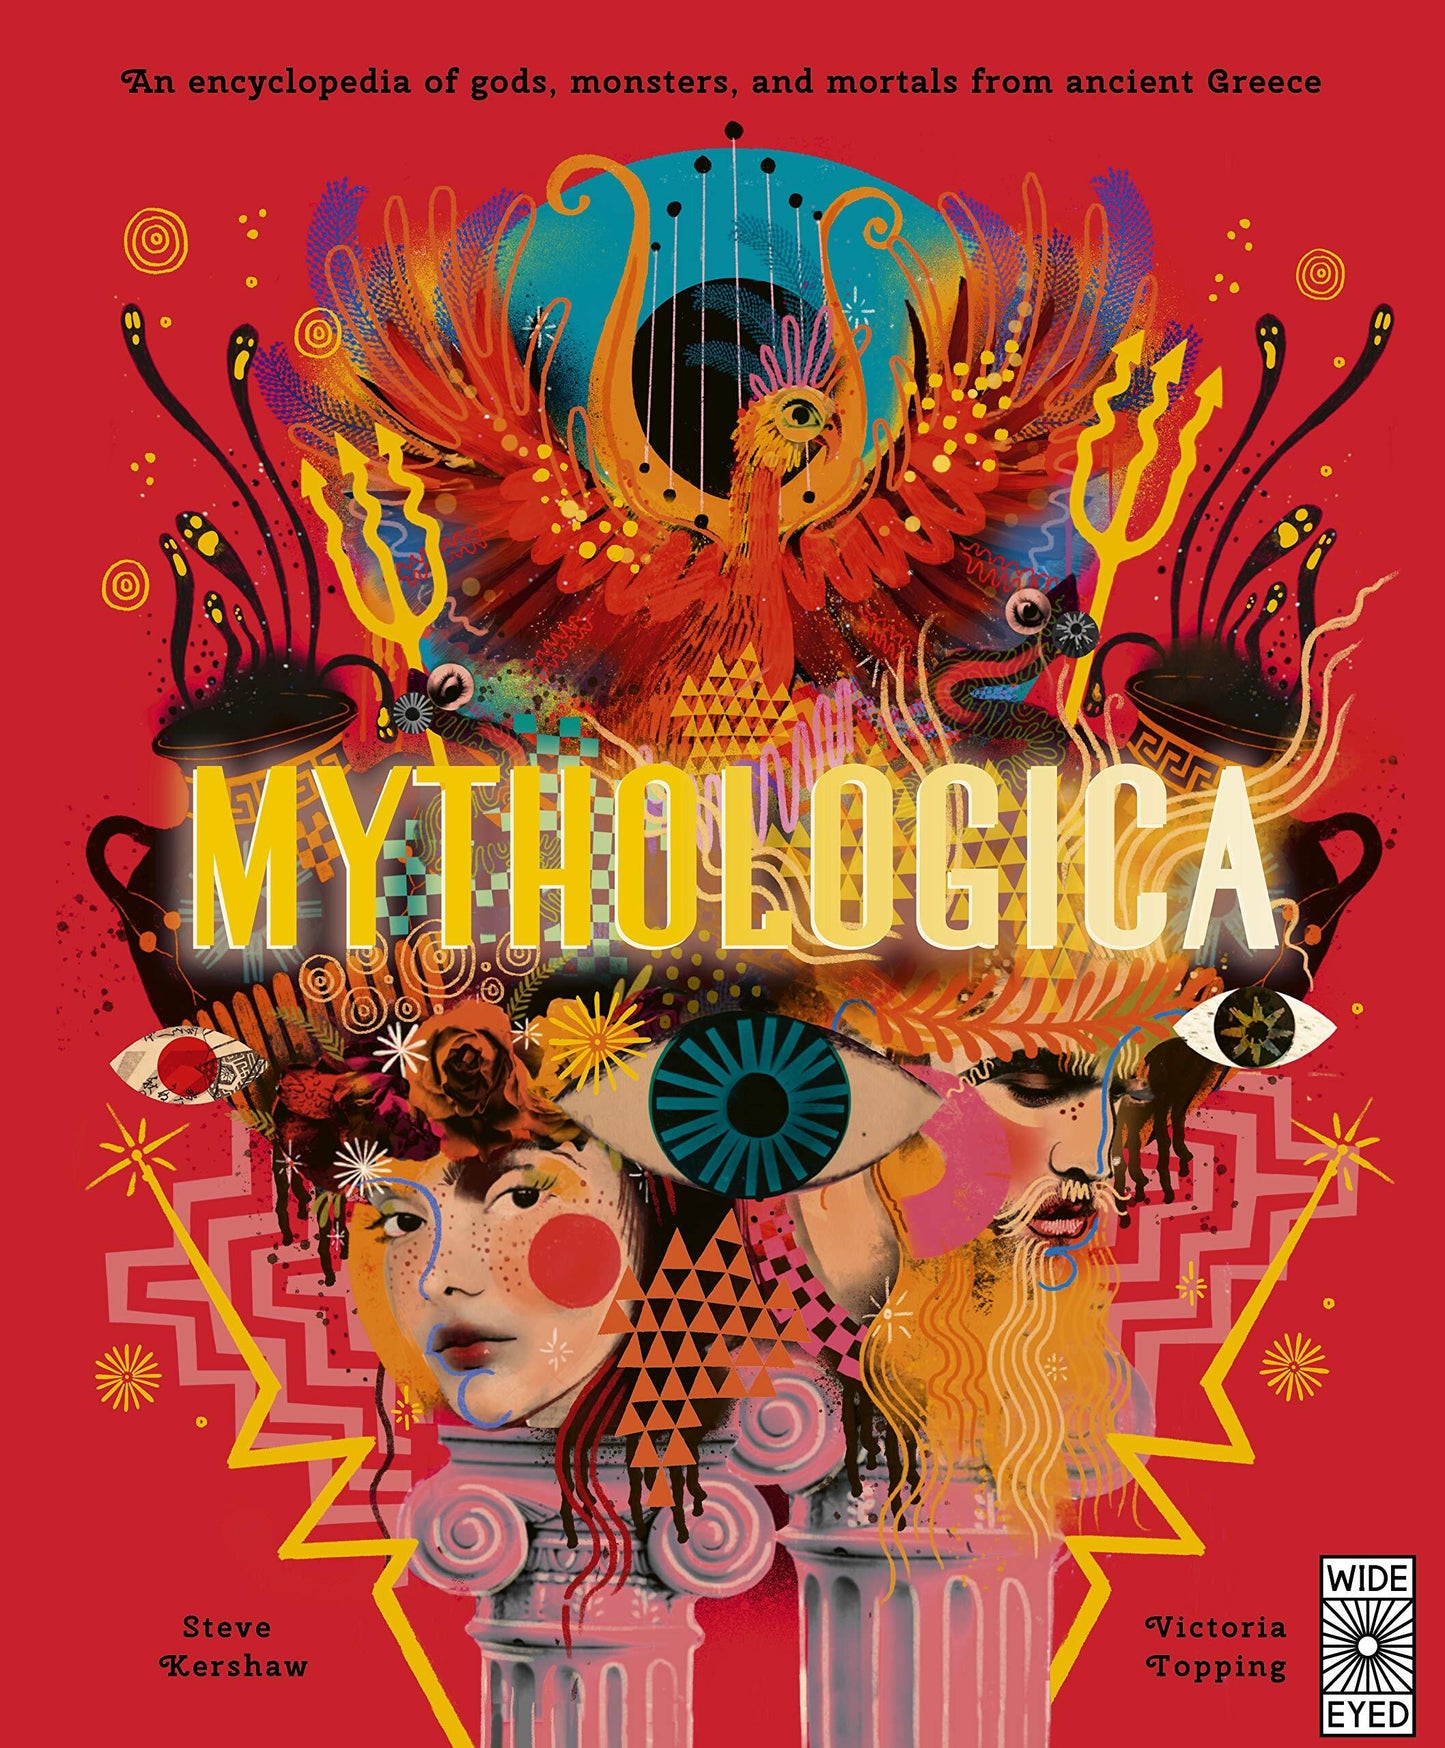 Mythologica: An encyclopedia of gods, monsters and mortals from ancient Greece Hardcover